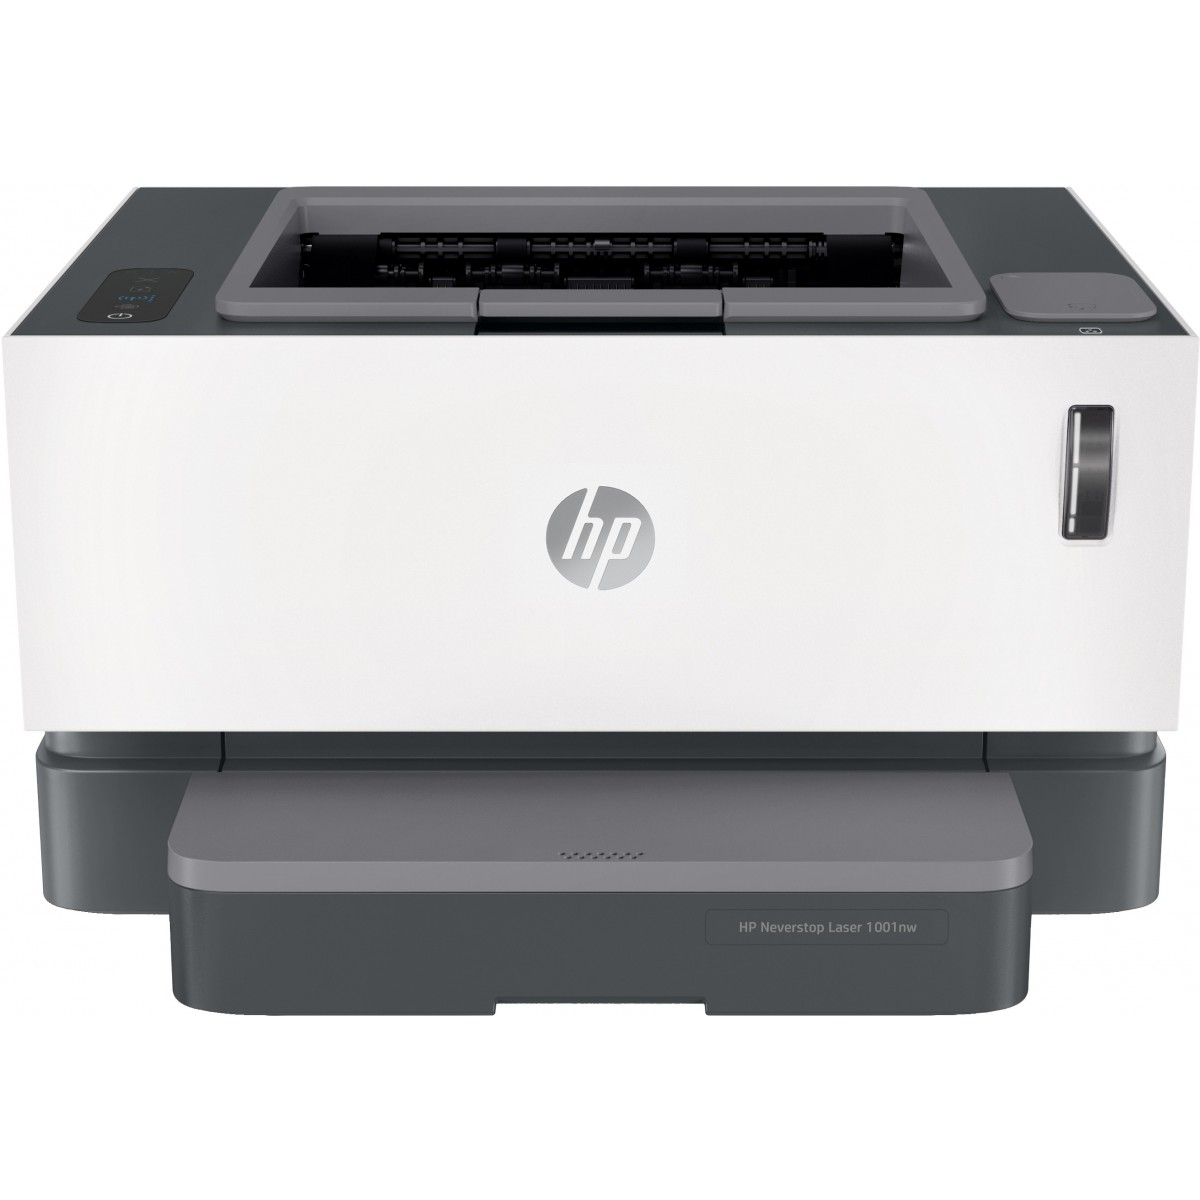 HP Neverstop Laser 1001nw - Laser - 600 x 600 DPI - A4 - 21 ppm - Duplex printing - Network ready